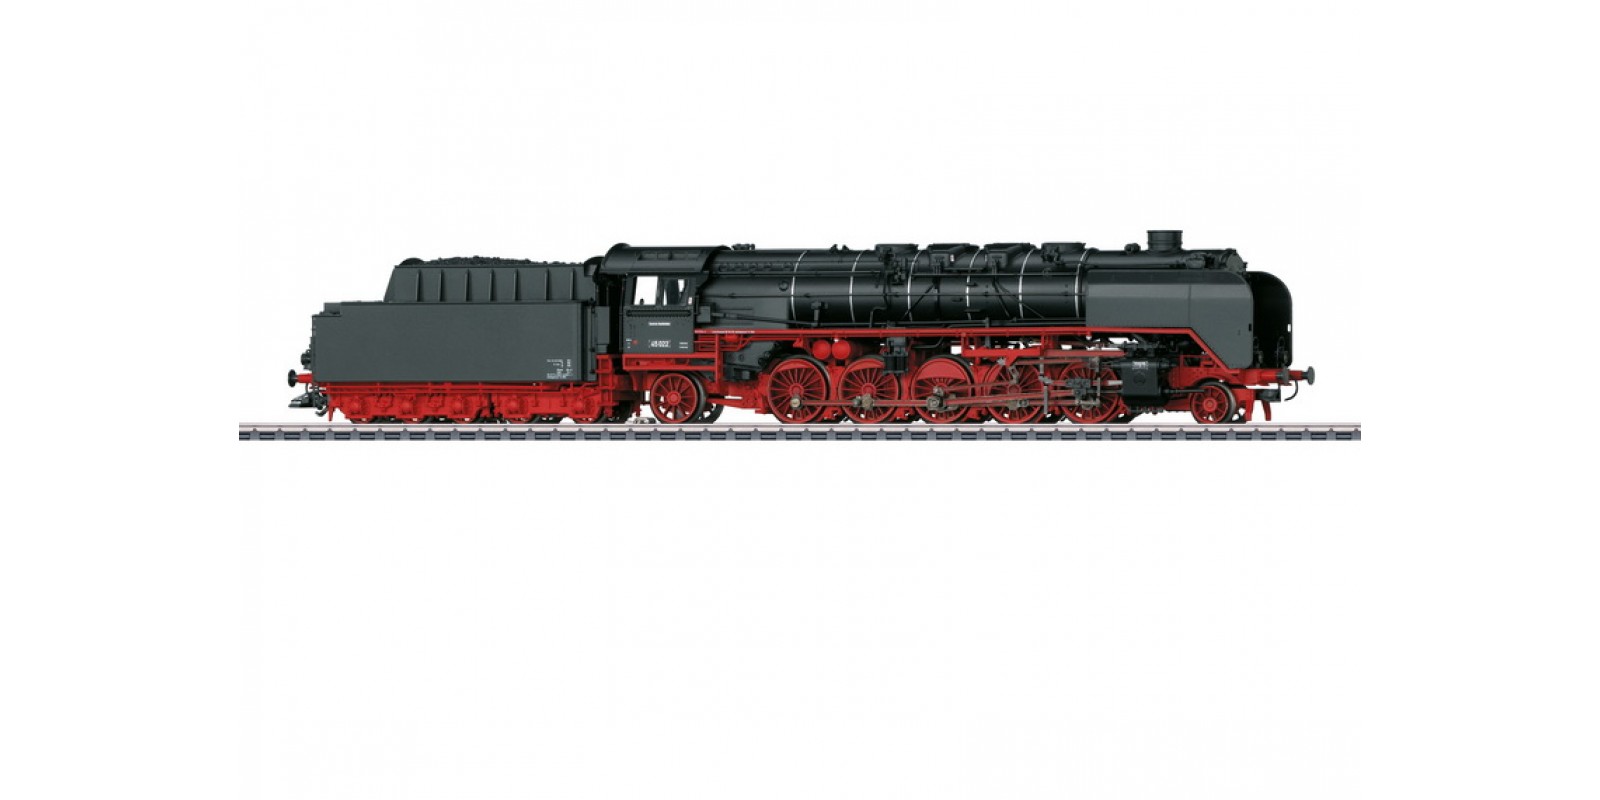 37454 Class 45 Heavy Freight Steam Locomotive with a Tender